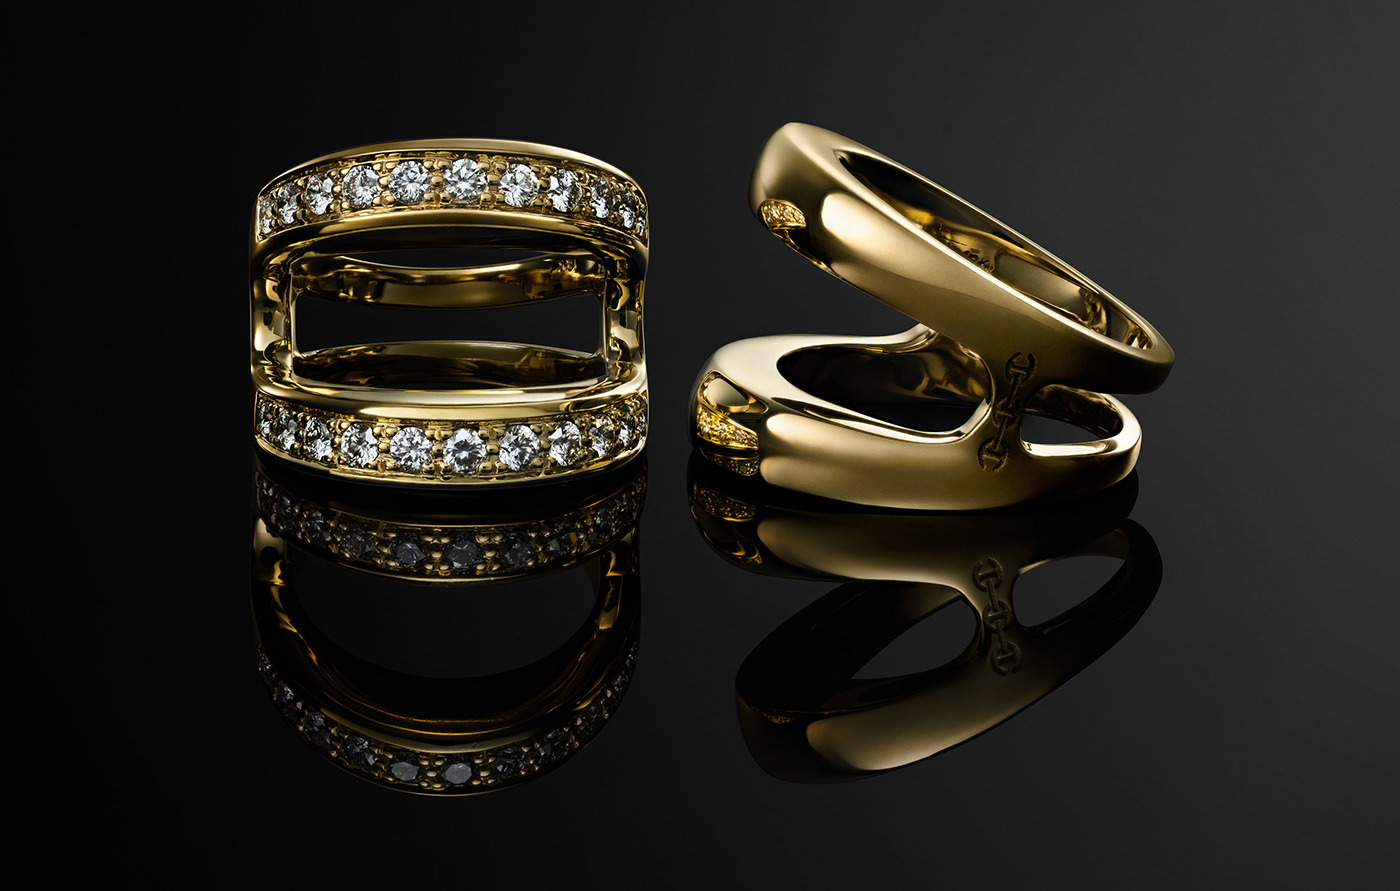 Elegant commercial and advertising jewelry product photography by Timothy Hogan in Los Angeles